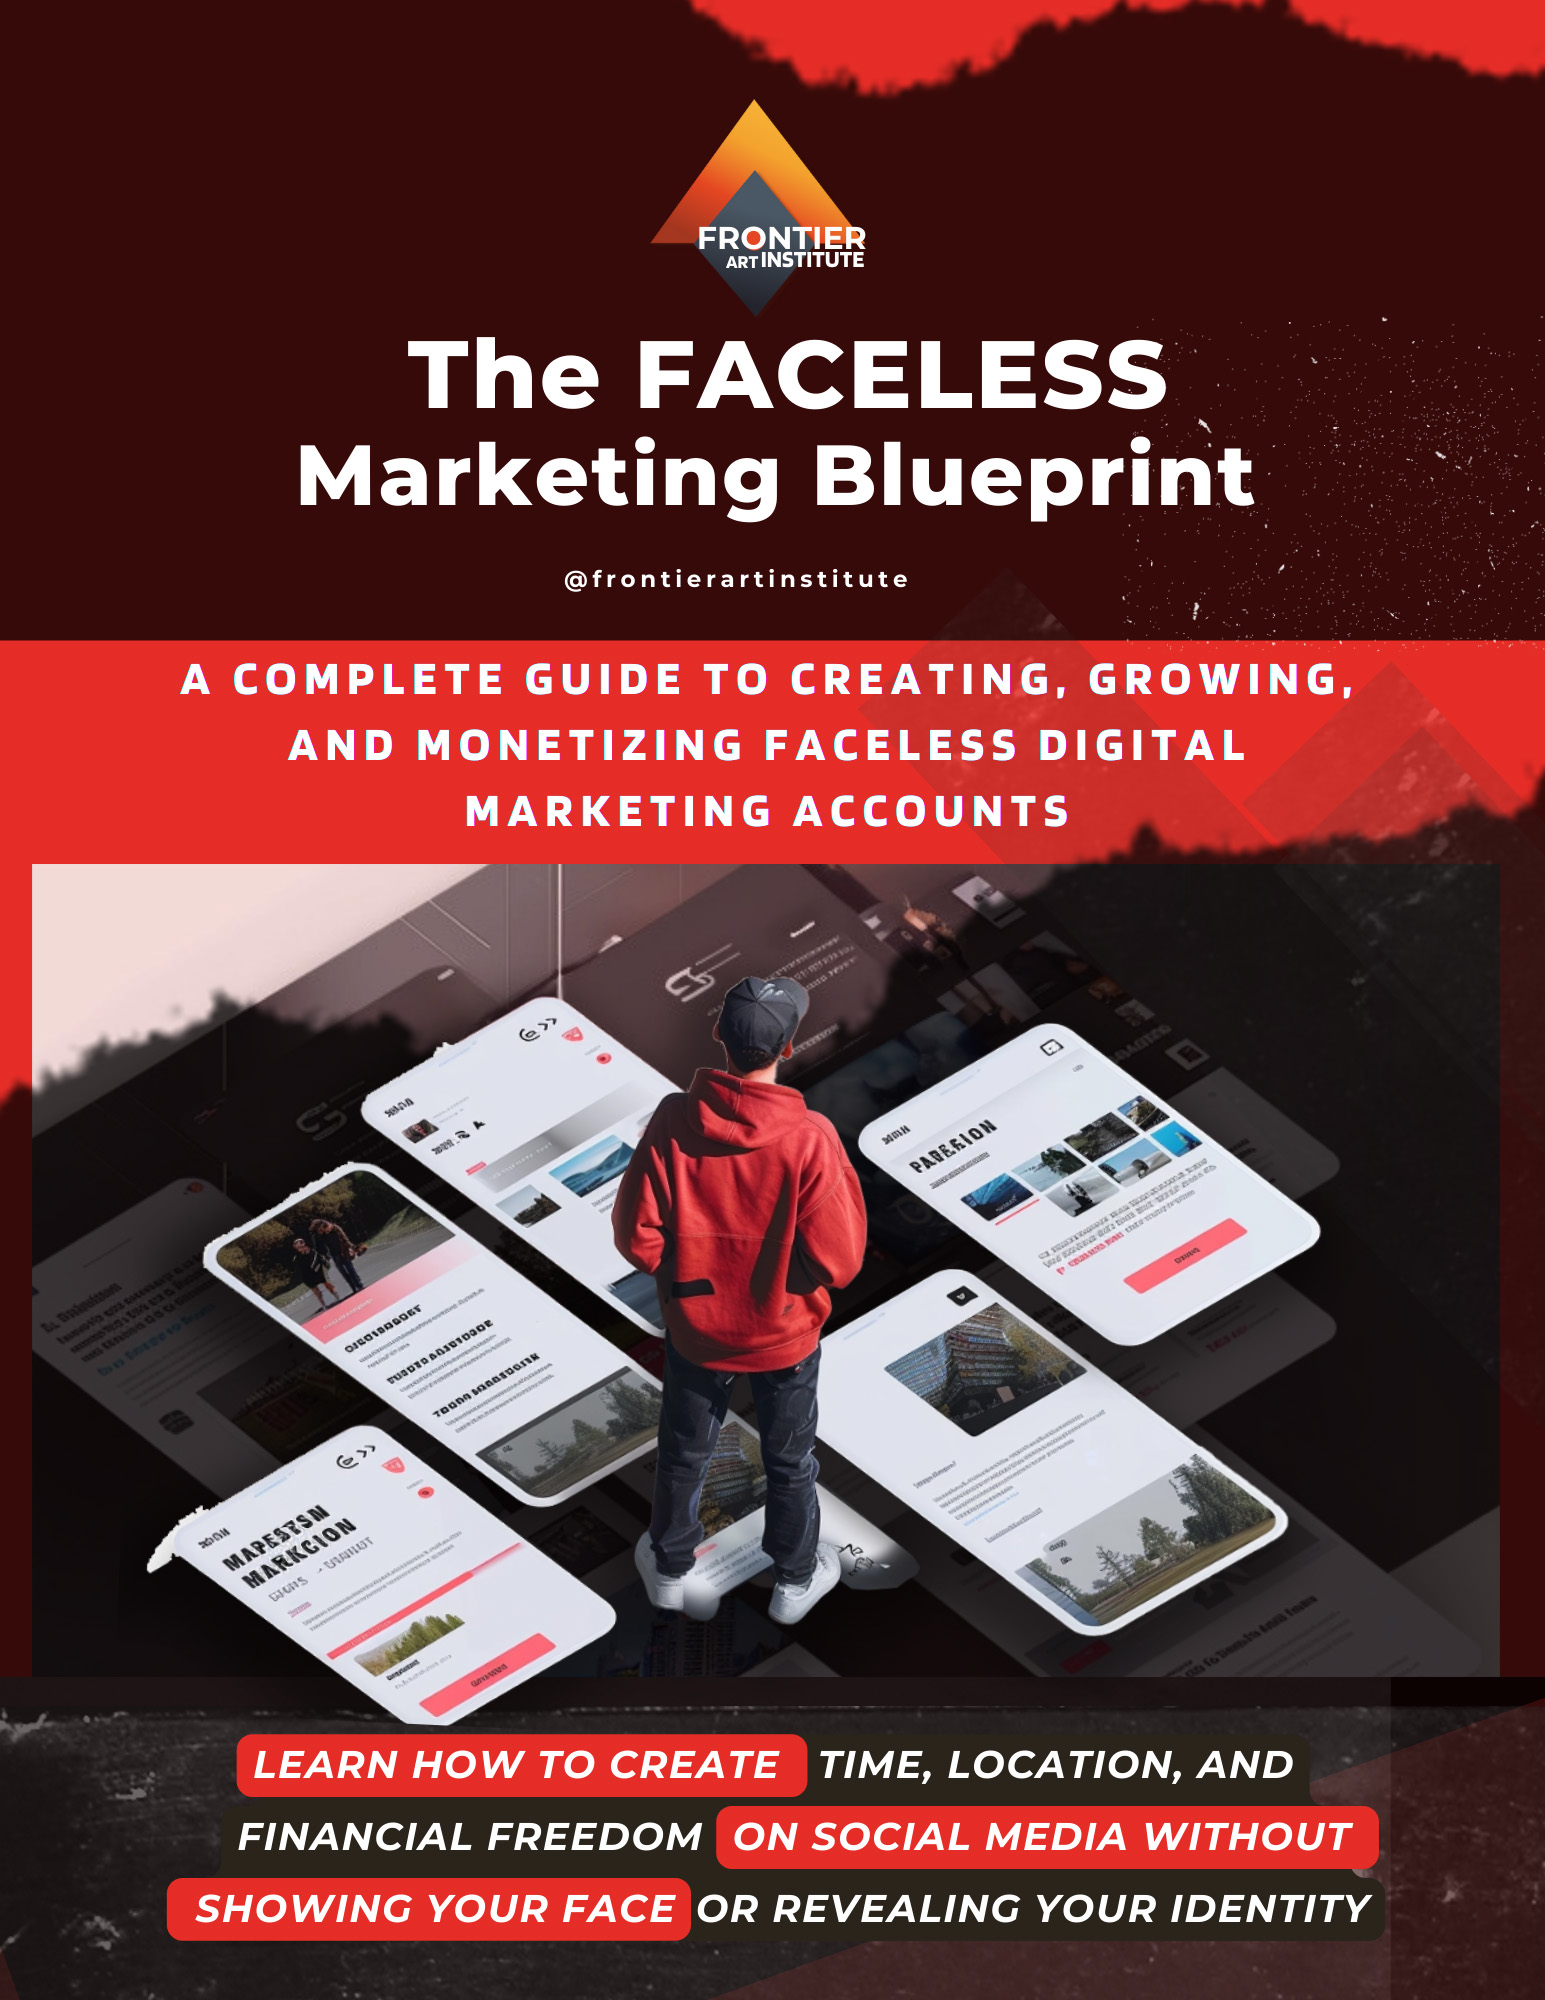 The Faceless Marketing Blueprint by Frontier Art Institute